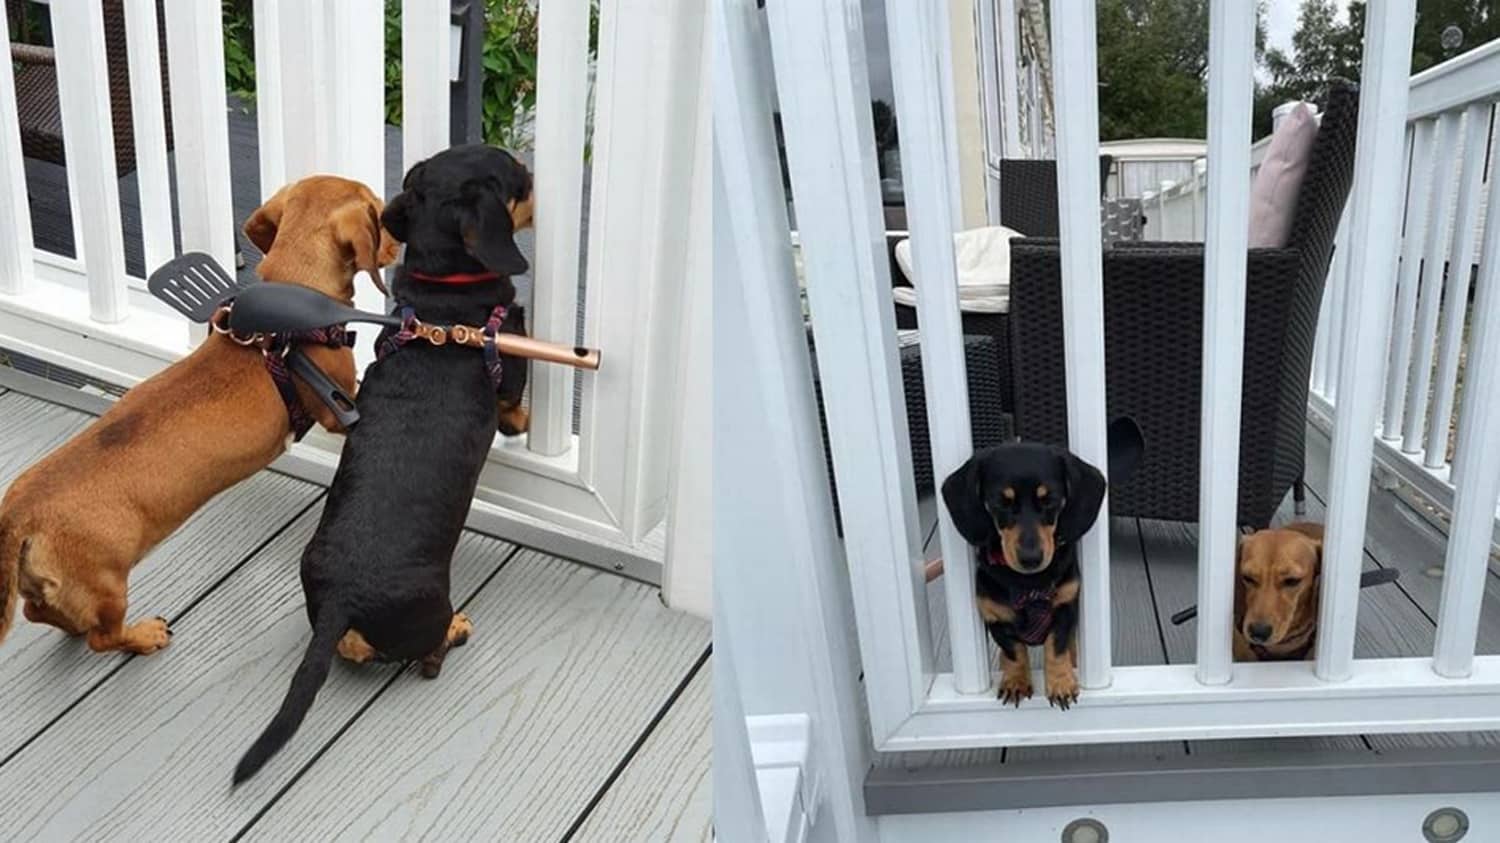 dachshunds escaping